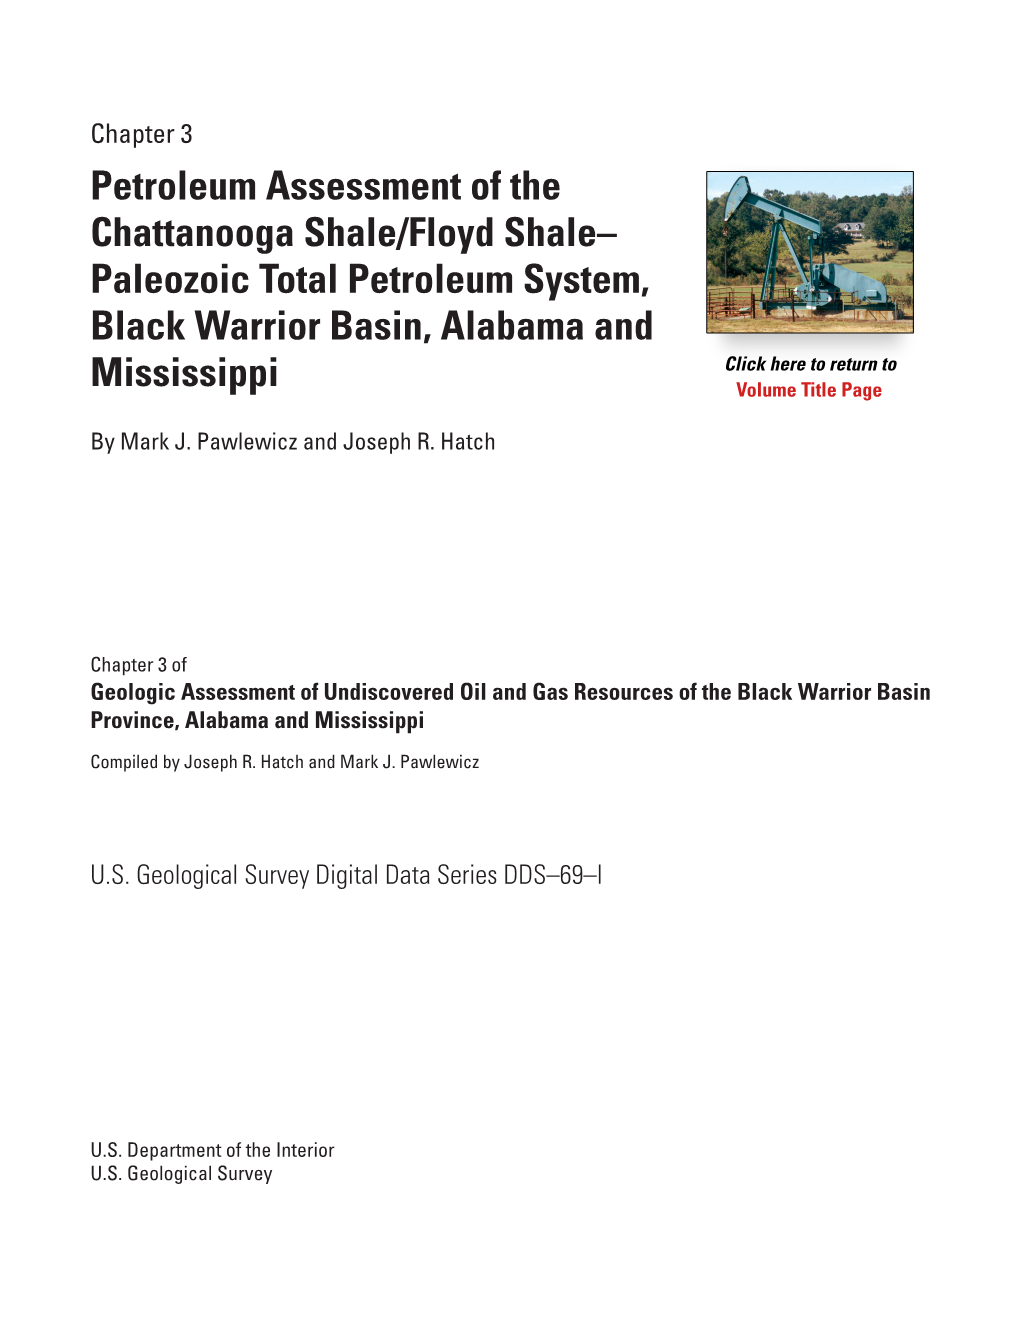 Chapter 3 — Petroleum Assessment of the Chattanooga Shale/Floyd Shale-Paleozoic Total Petroleum System, Black Warrior